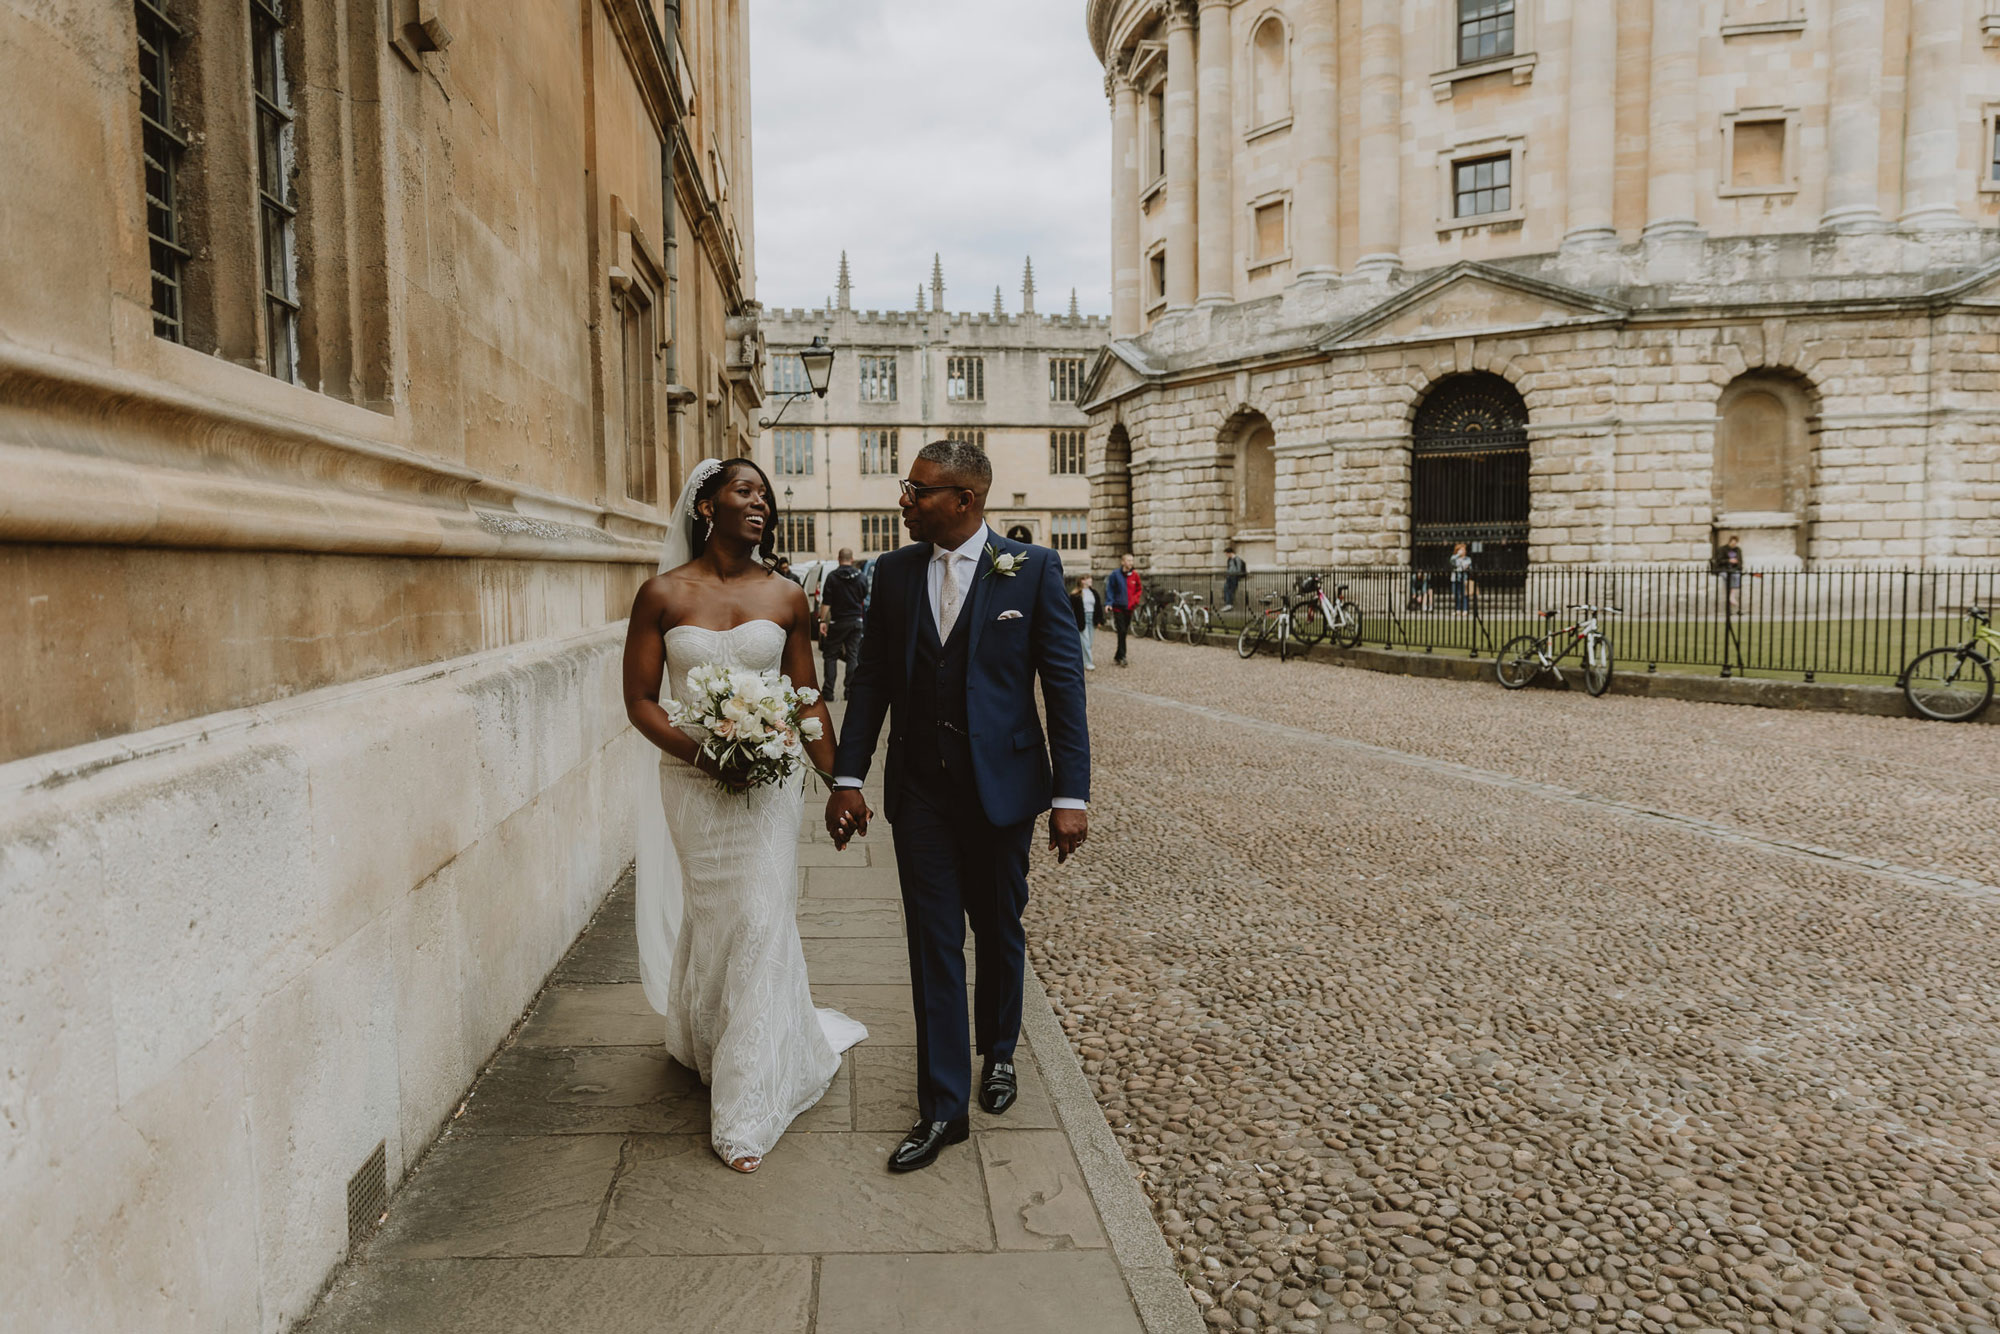 Wedding couple walk alongside The Radcliffe Camera in Oxford after their wedding